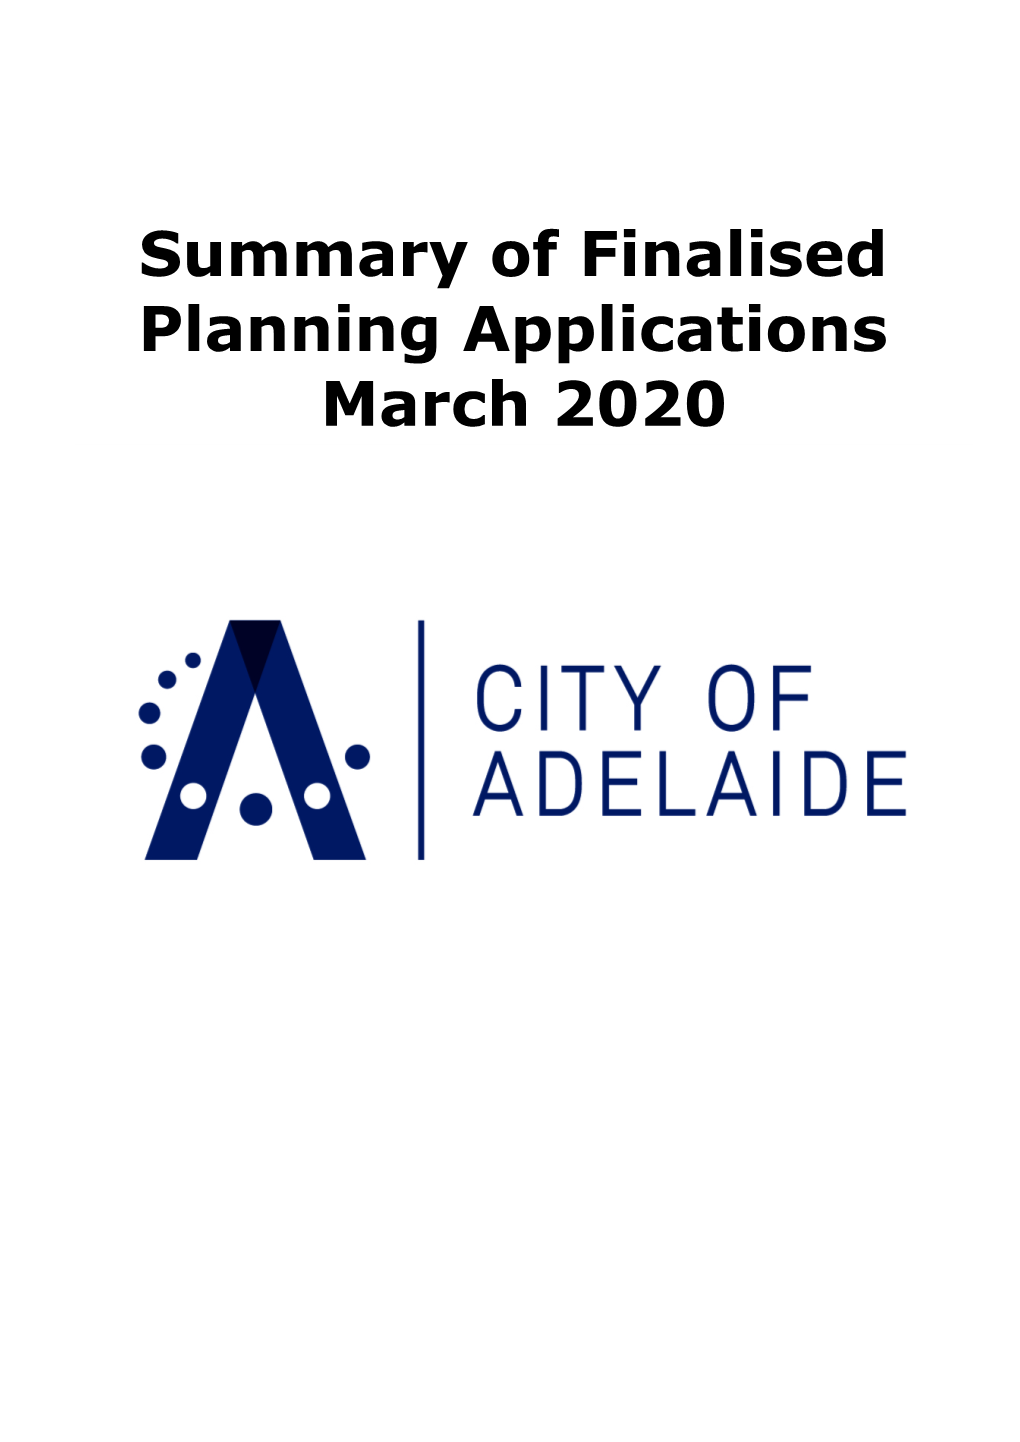 Summary of Finalised Planning Applications March 2020 Summary of Finalised Planning Applications March 2020